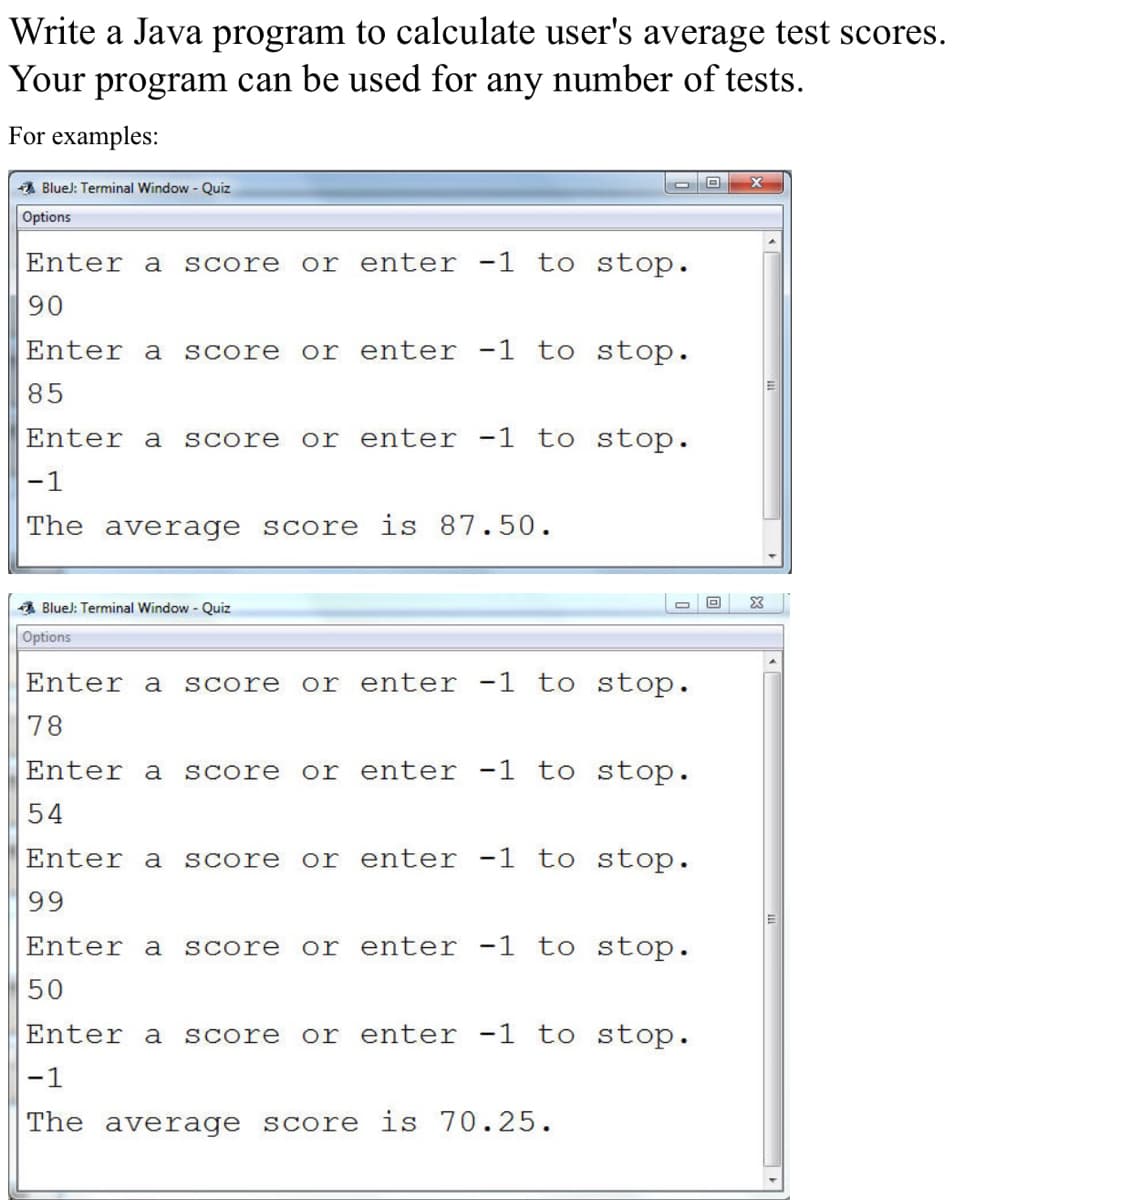 Write a Java program to calculate user's average test scores.
Your program can be used for any number of tests.
For examples:
BlueJ: Terminal Window - Quiz
Options
Enter a score or enter -1 to stop.
90
Enter a score or enter -1 to stop.
85
Enter a score or enter -1 to stop.
-1
The average score is 87.50.
BlueJ: Terminal Window - Quiz
Options
Enter a score or enter -1 to stop.
78
Enter a score or enter -1 to stop.
54
Enter a score or enter -1 to stop.
99
Enter a score or enter -1 to stop.
50
Enter a score or enter -1 to stop.
-1
The average score is 70.25.
O